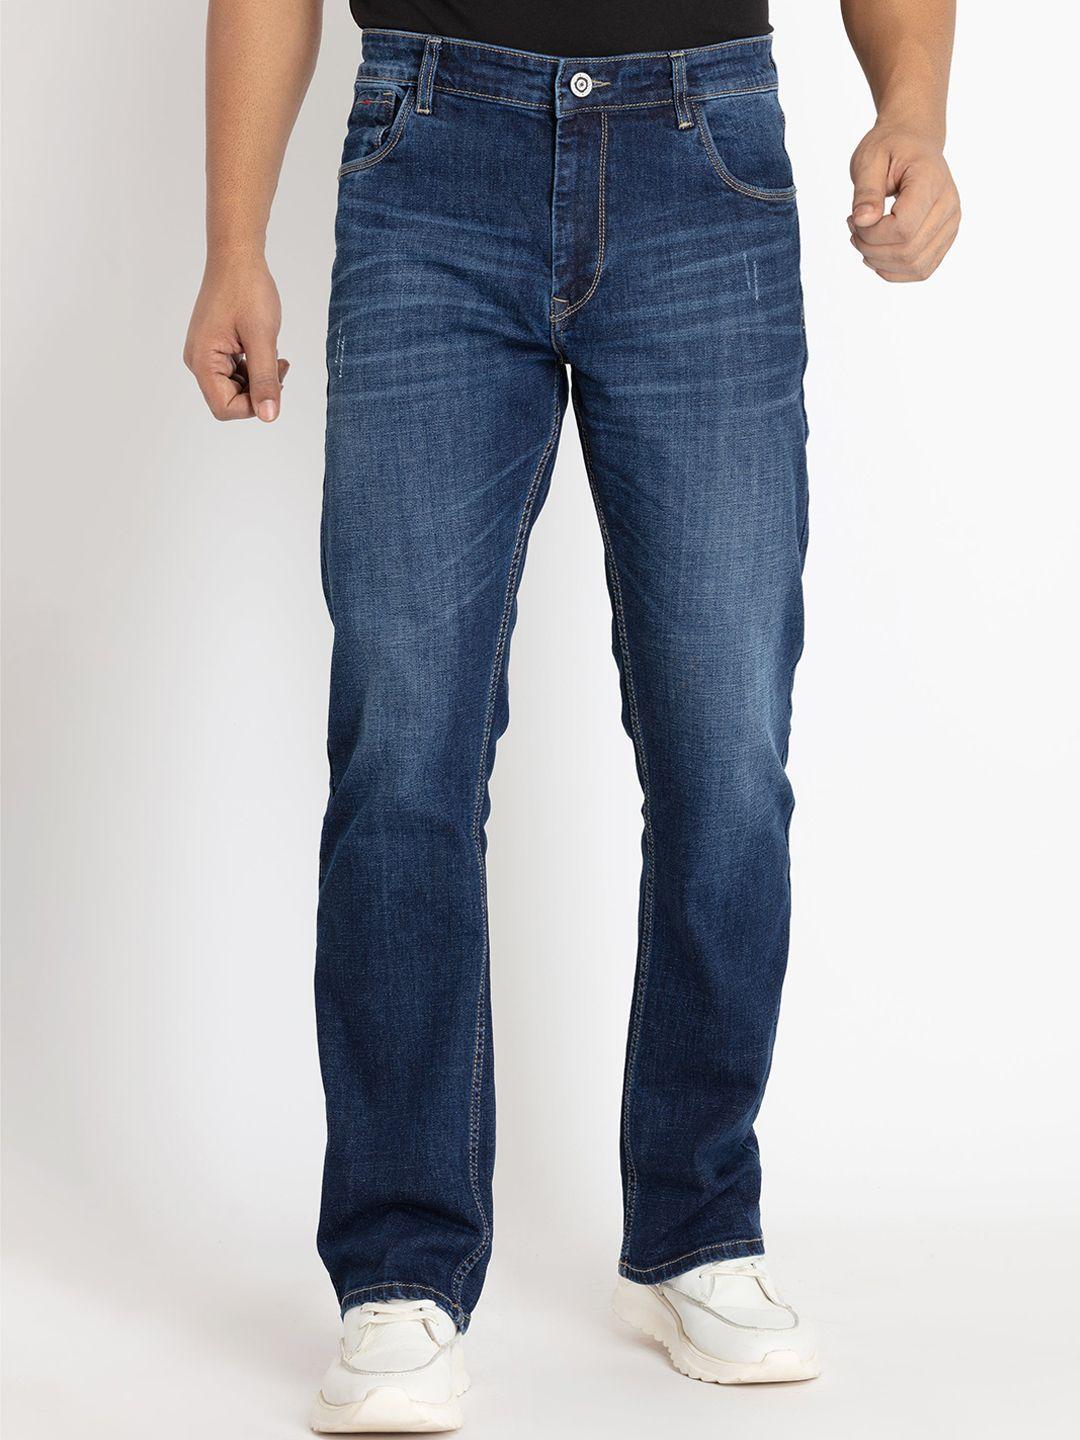 status quo men bootcut light fade stretchable jeans